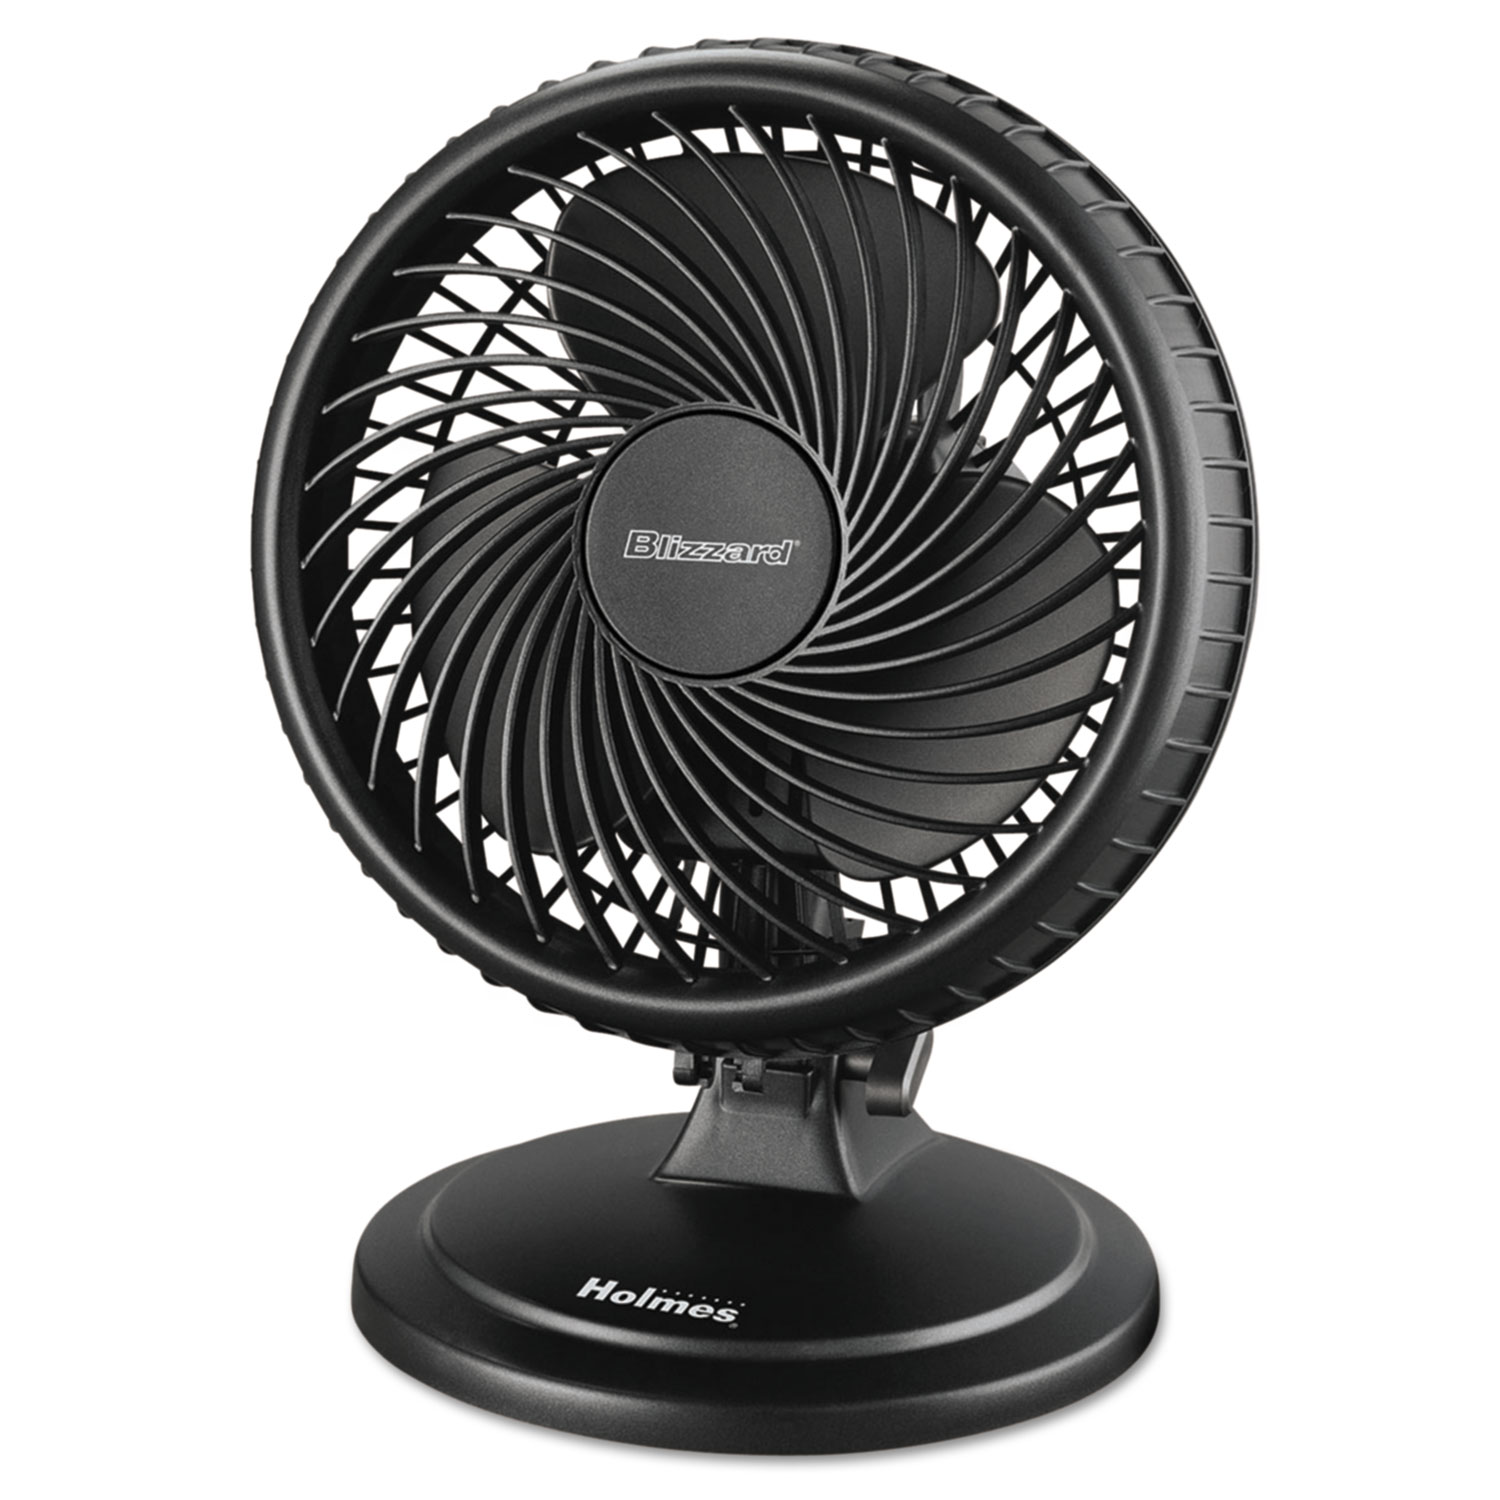 Lil' Blizzard 7" Two-Speed Oscillating Personal Table Fan, Plastic, Black